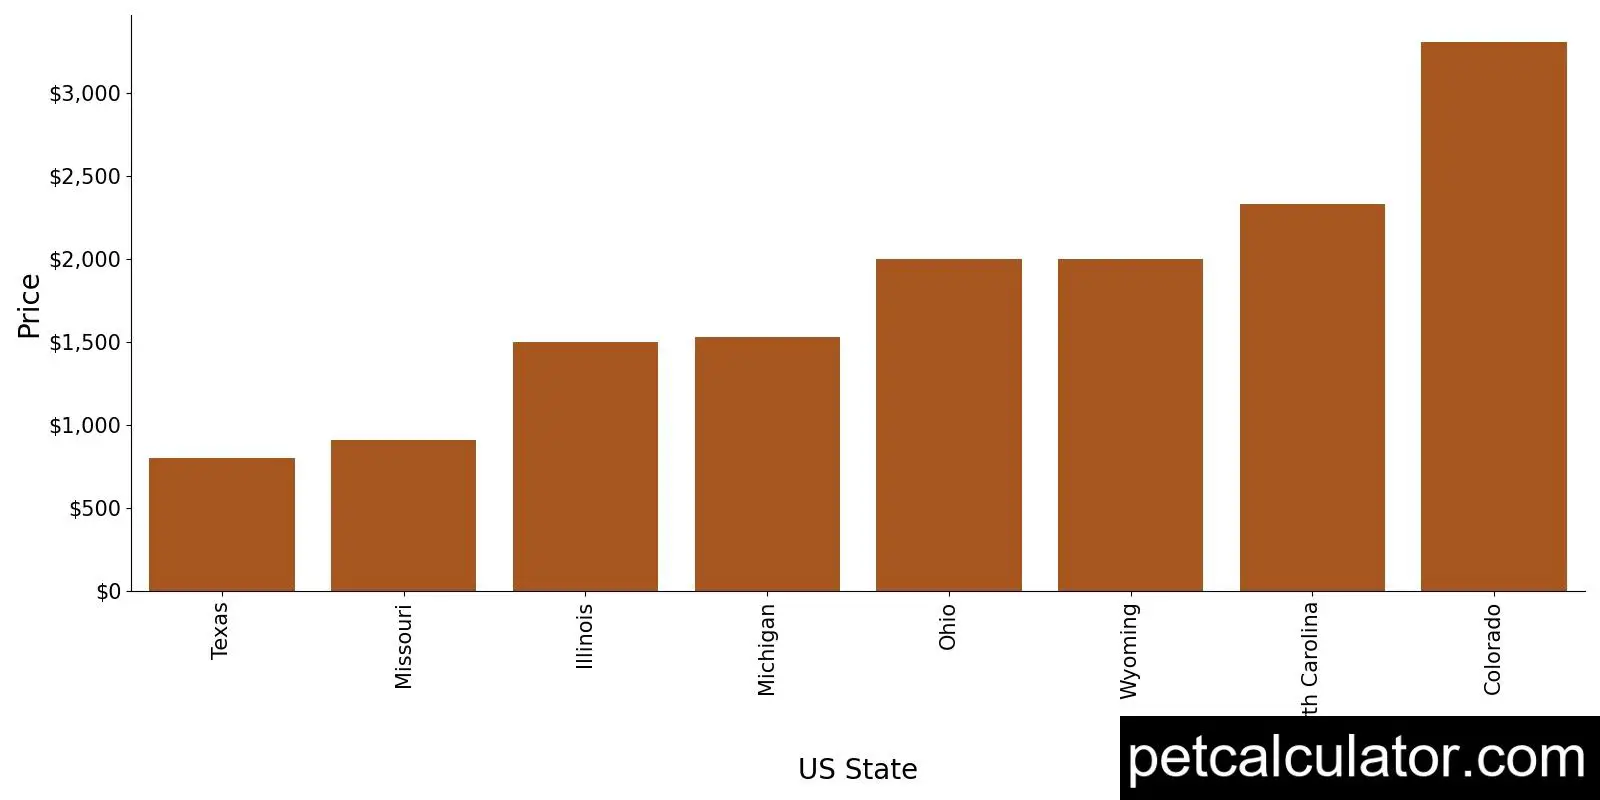 Price of Miniature American Shepherd by US State 